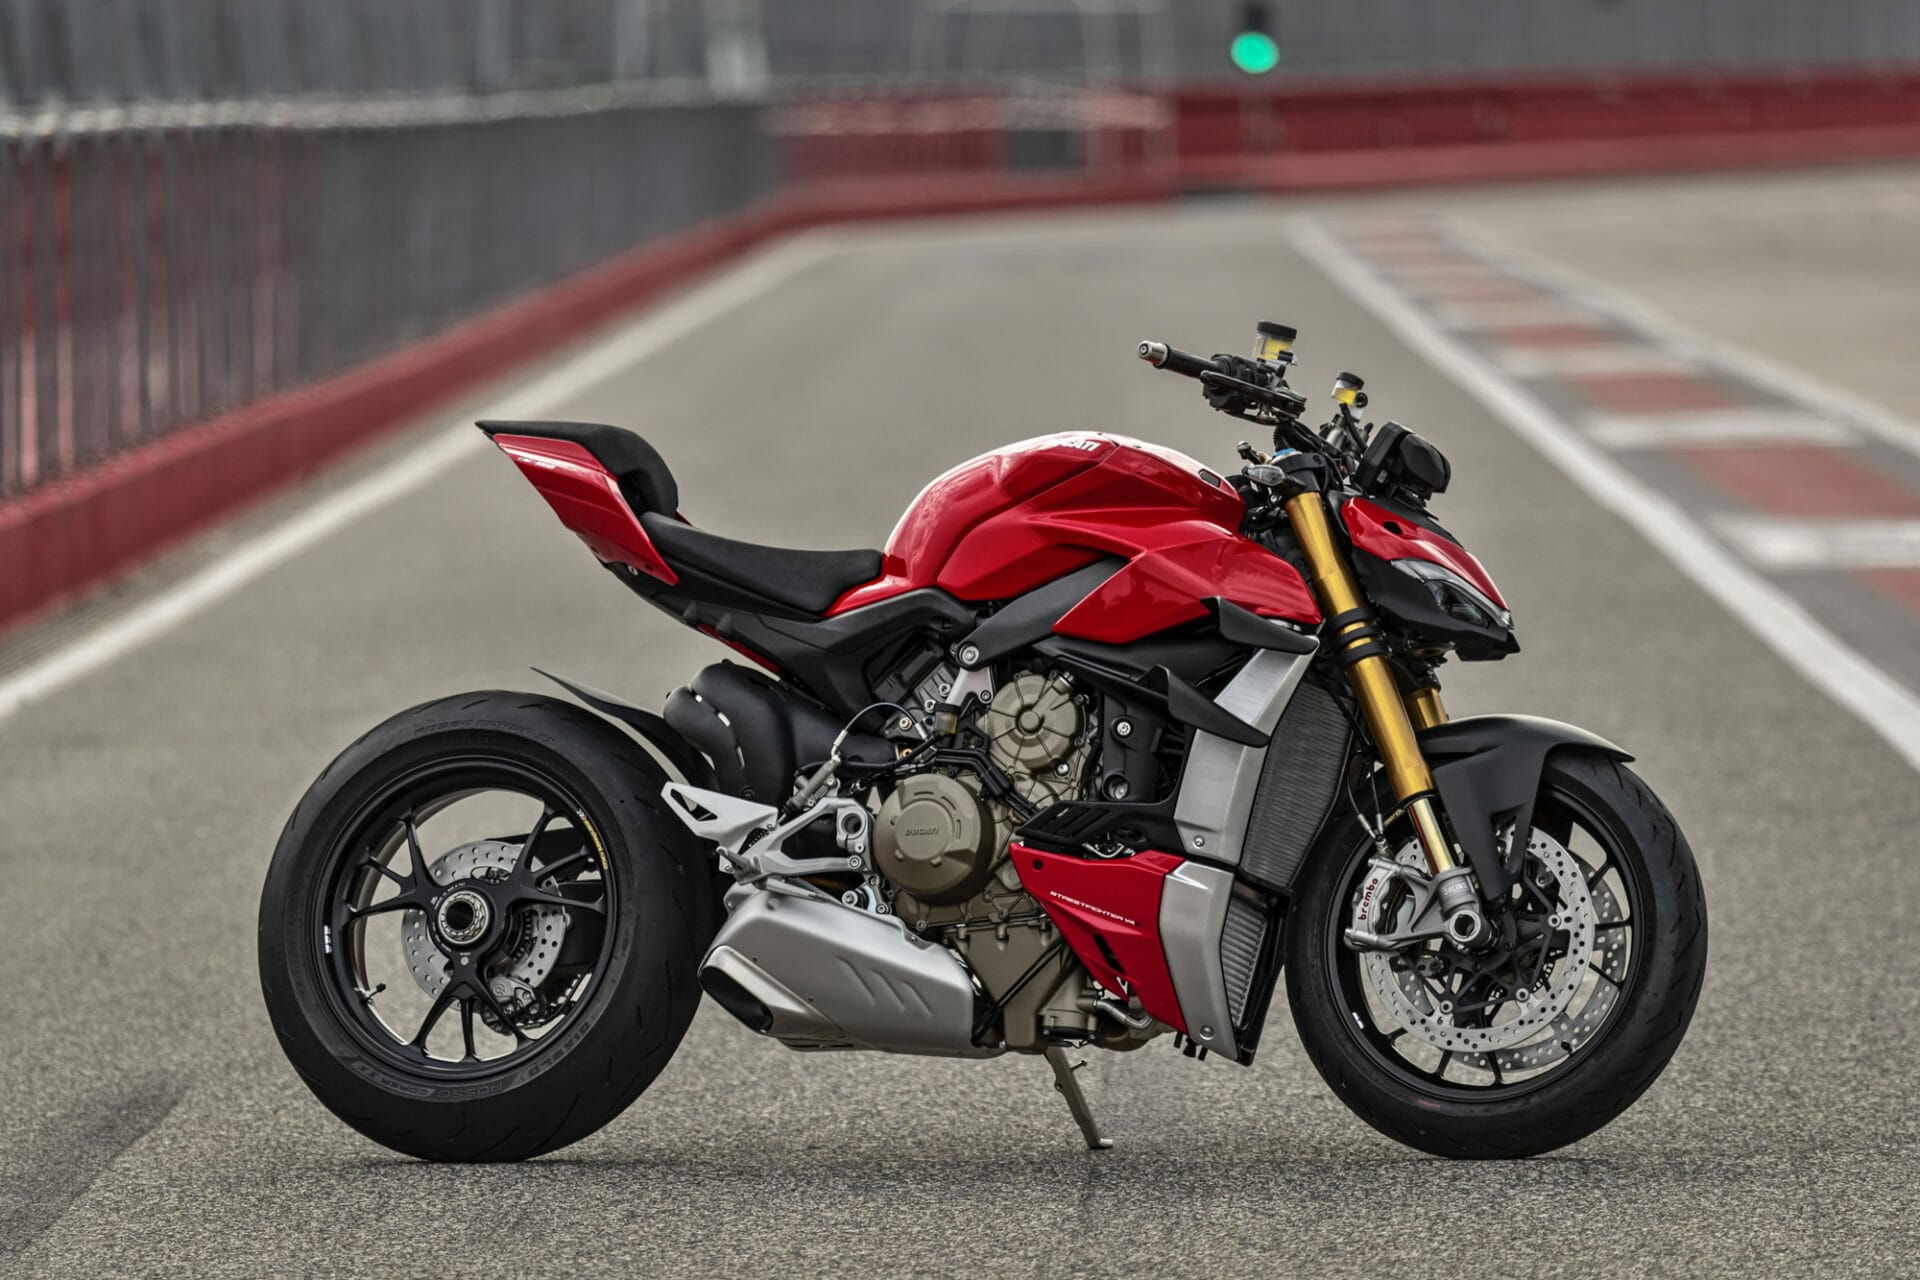 #Ducati #StreetfighterV4 voted "most beautiful motorcycle" by EICMA
- also in the app Motorcycle News